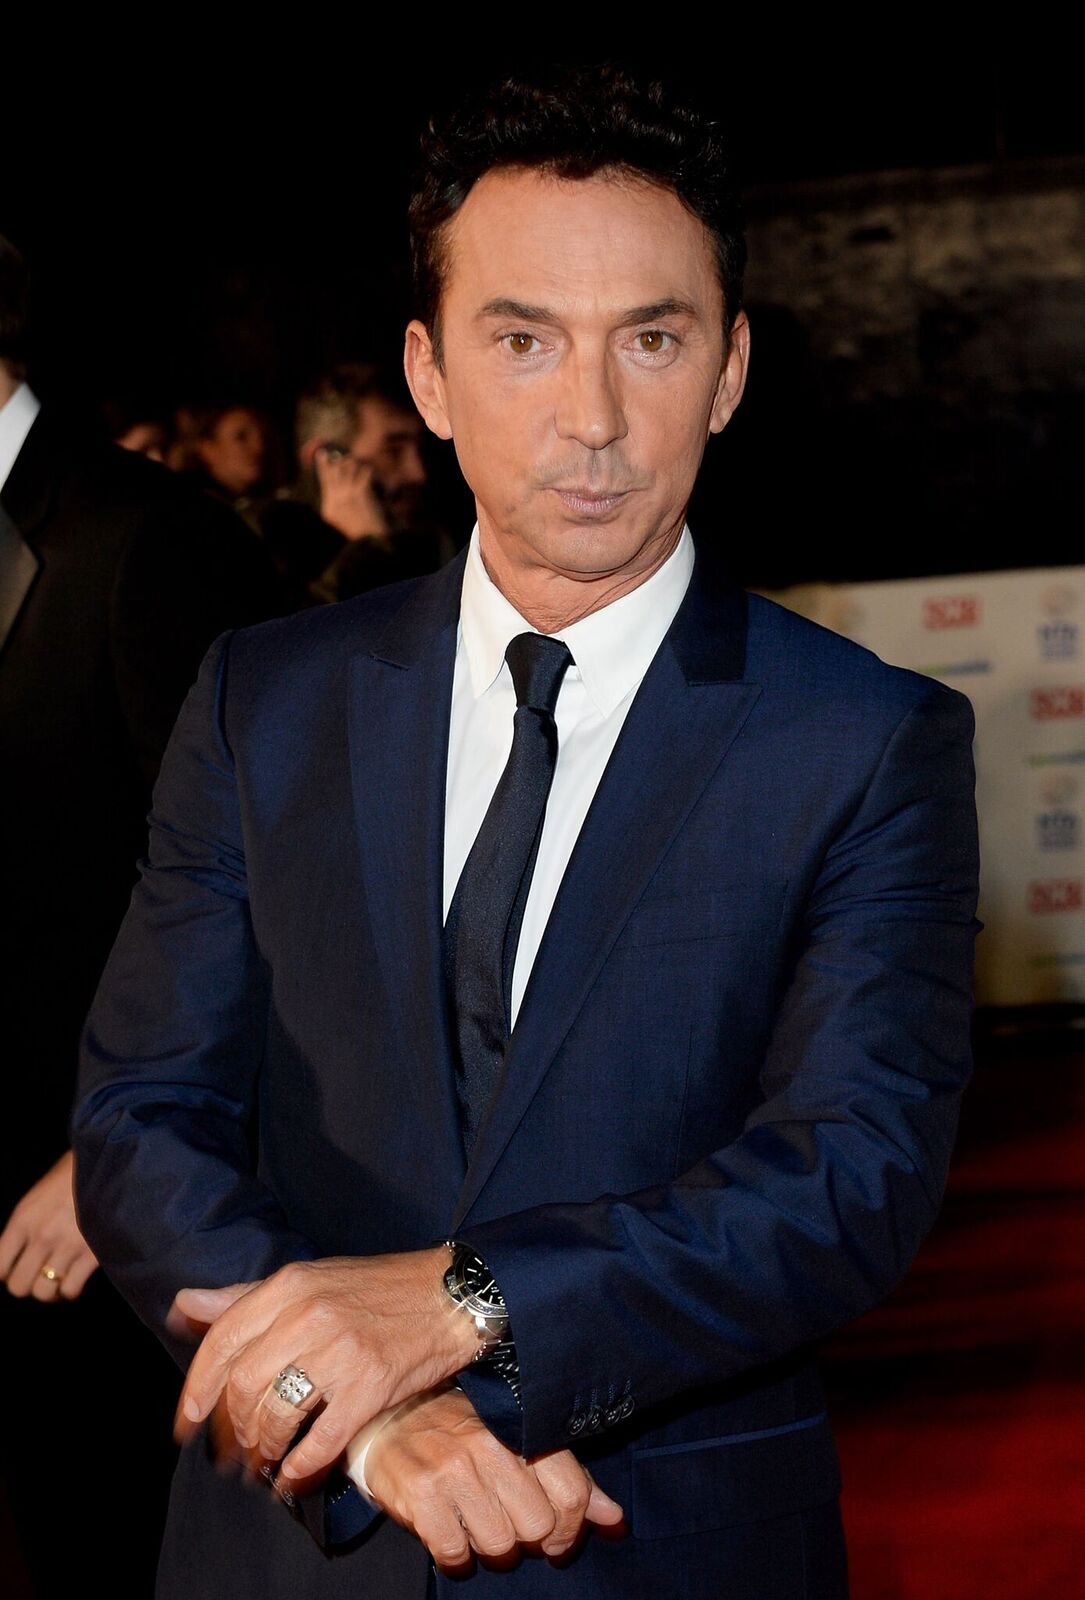 Bruno Tonioli attends the National Television Awards at the 02 Arena on January 22, 2014 in London, England | Photo: Getty Images